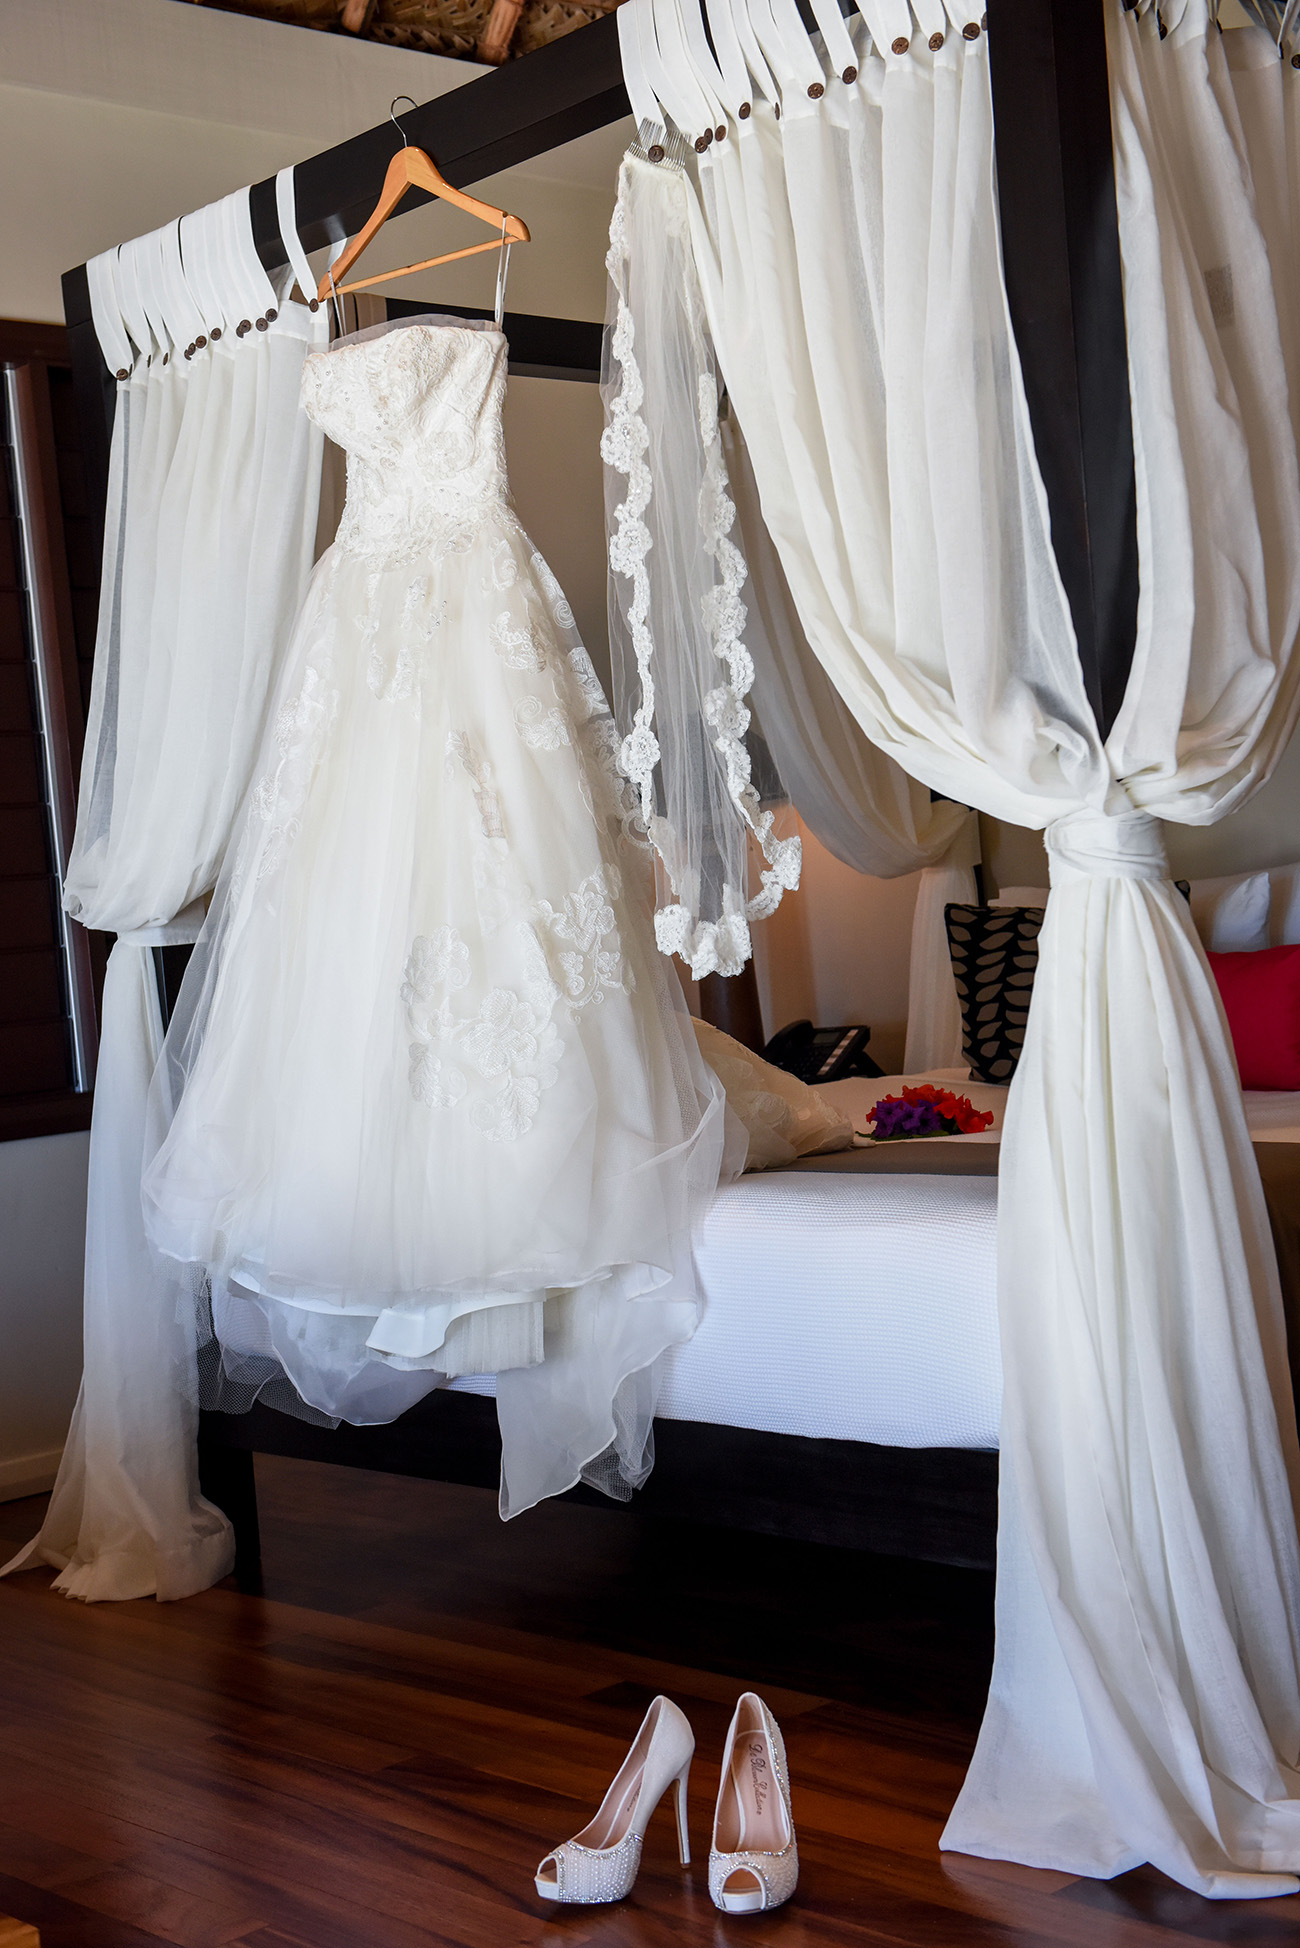 The wedding dress hanging on the beautiful bed of the villa at Paradise Cove Island Resort in the Yasawas in Fiji